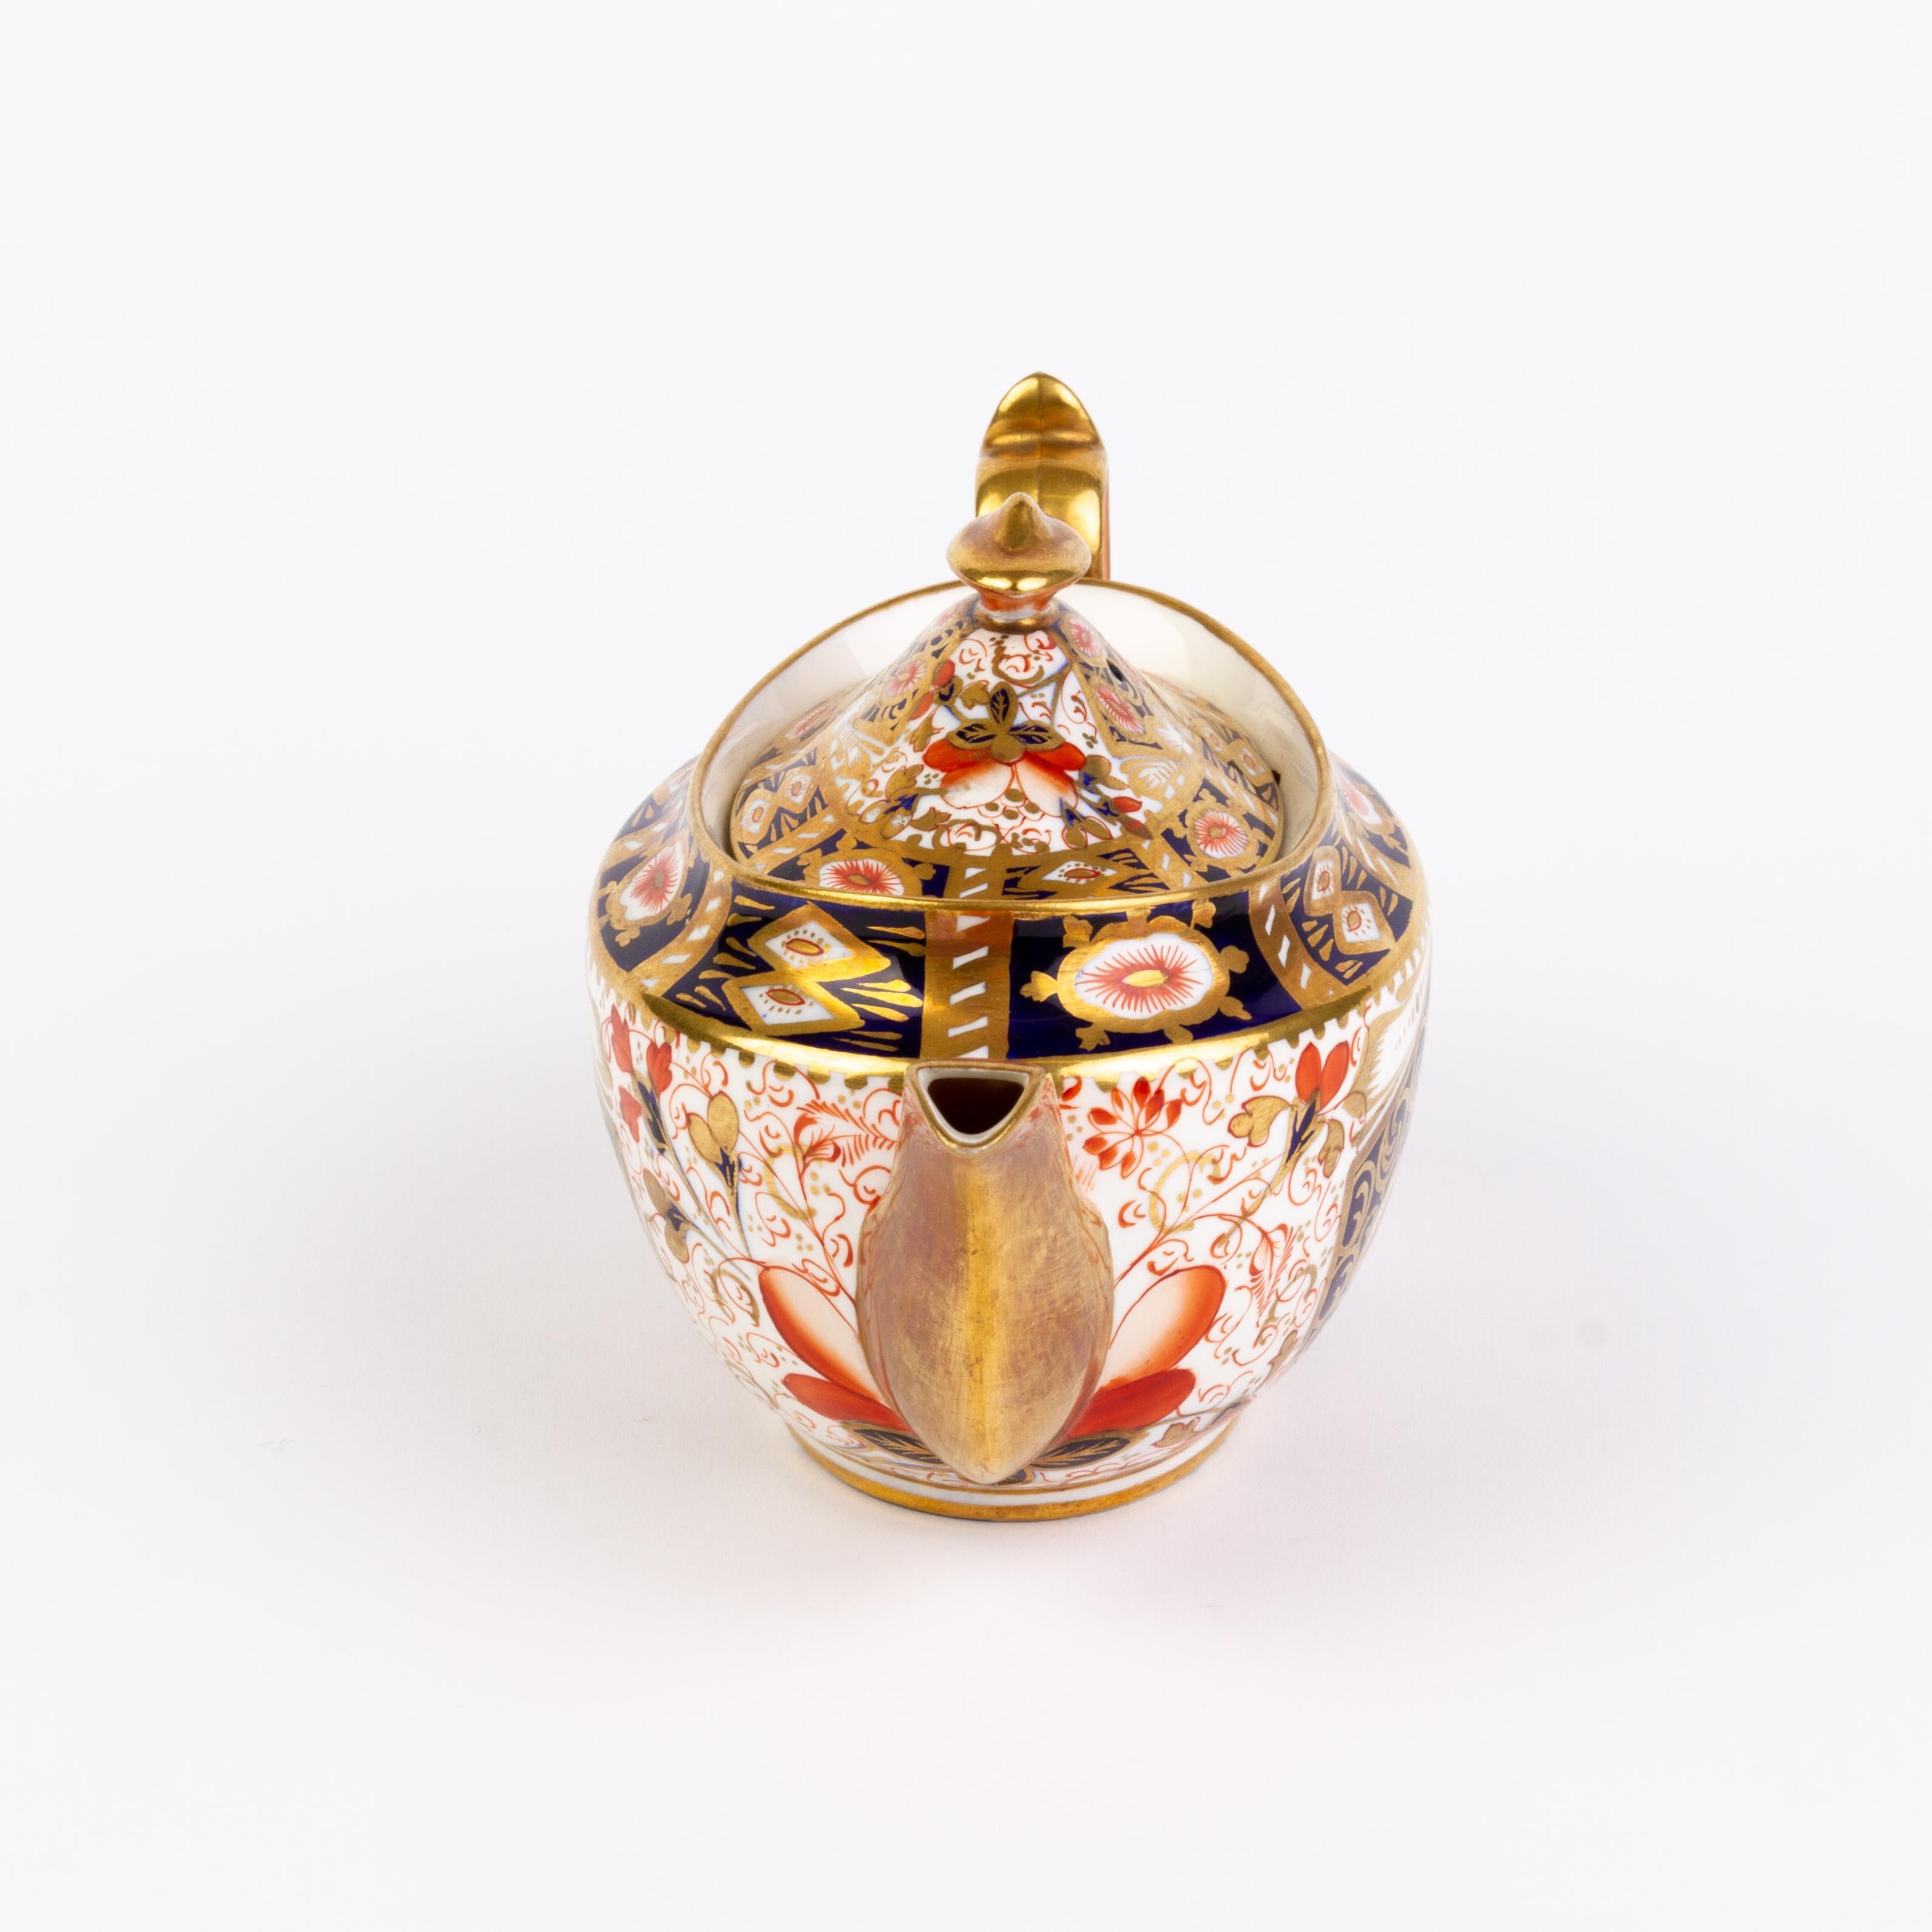 English Royal Crown Derby Imari Fine Gilt Porcelain Lidded Teapot
Good condition, as seen
From a private collection
Free international shipping.